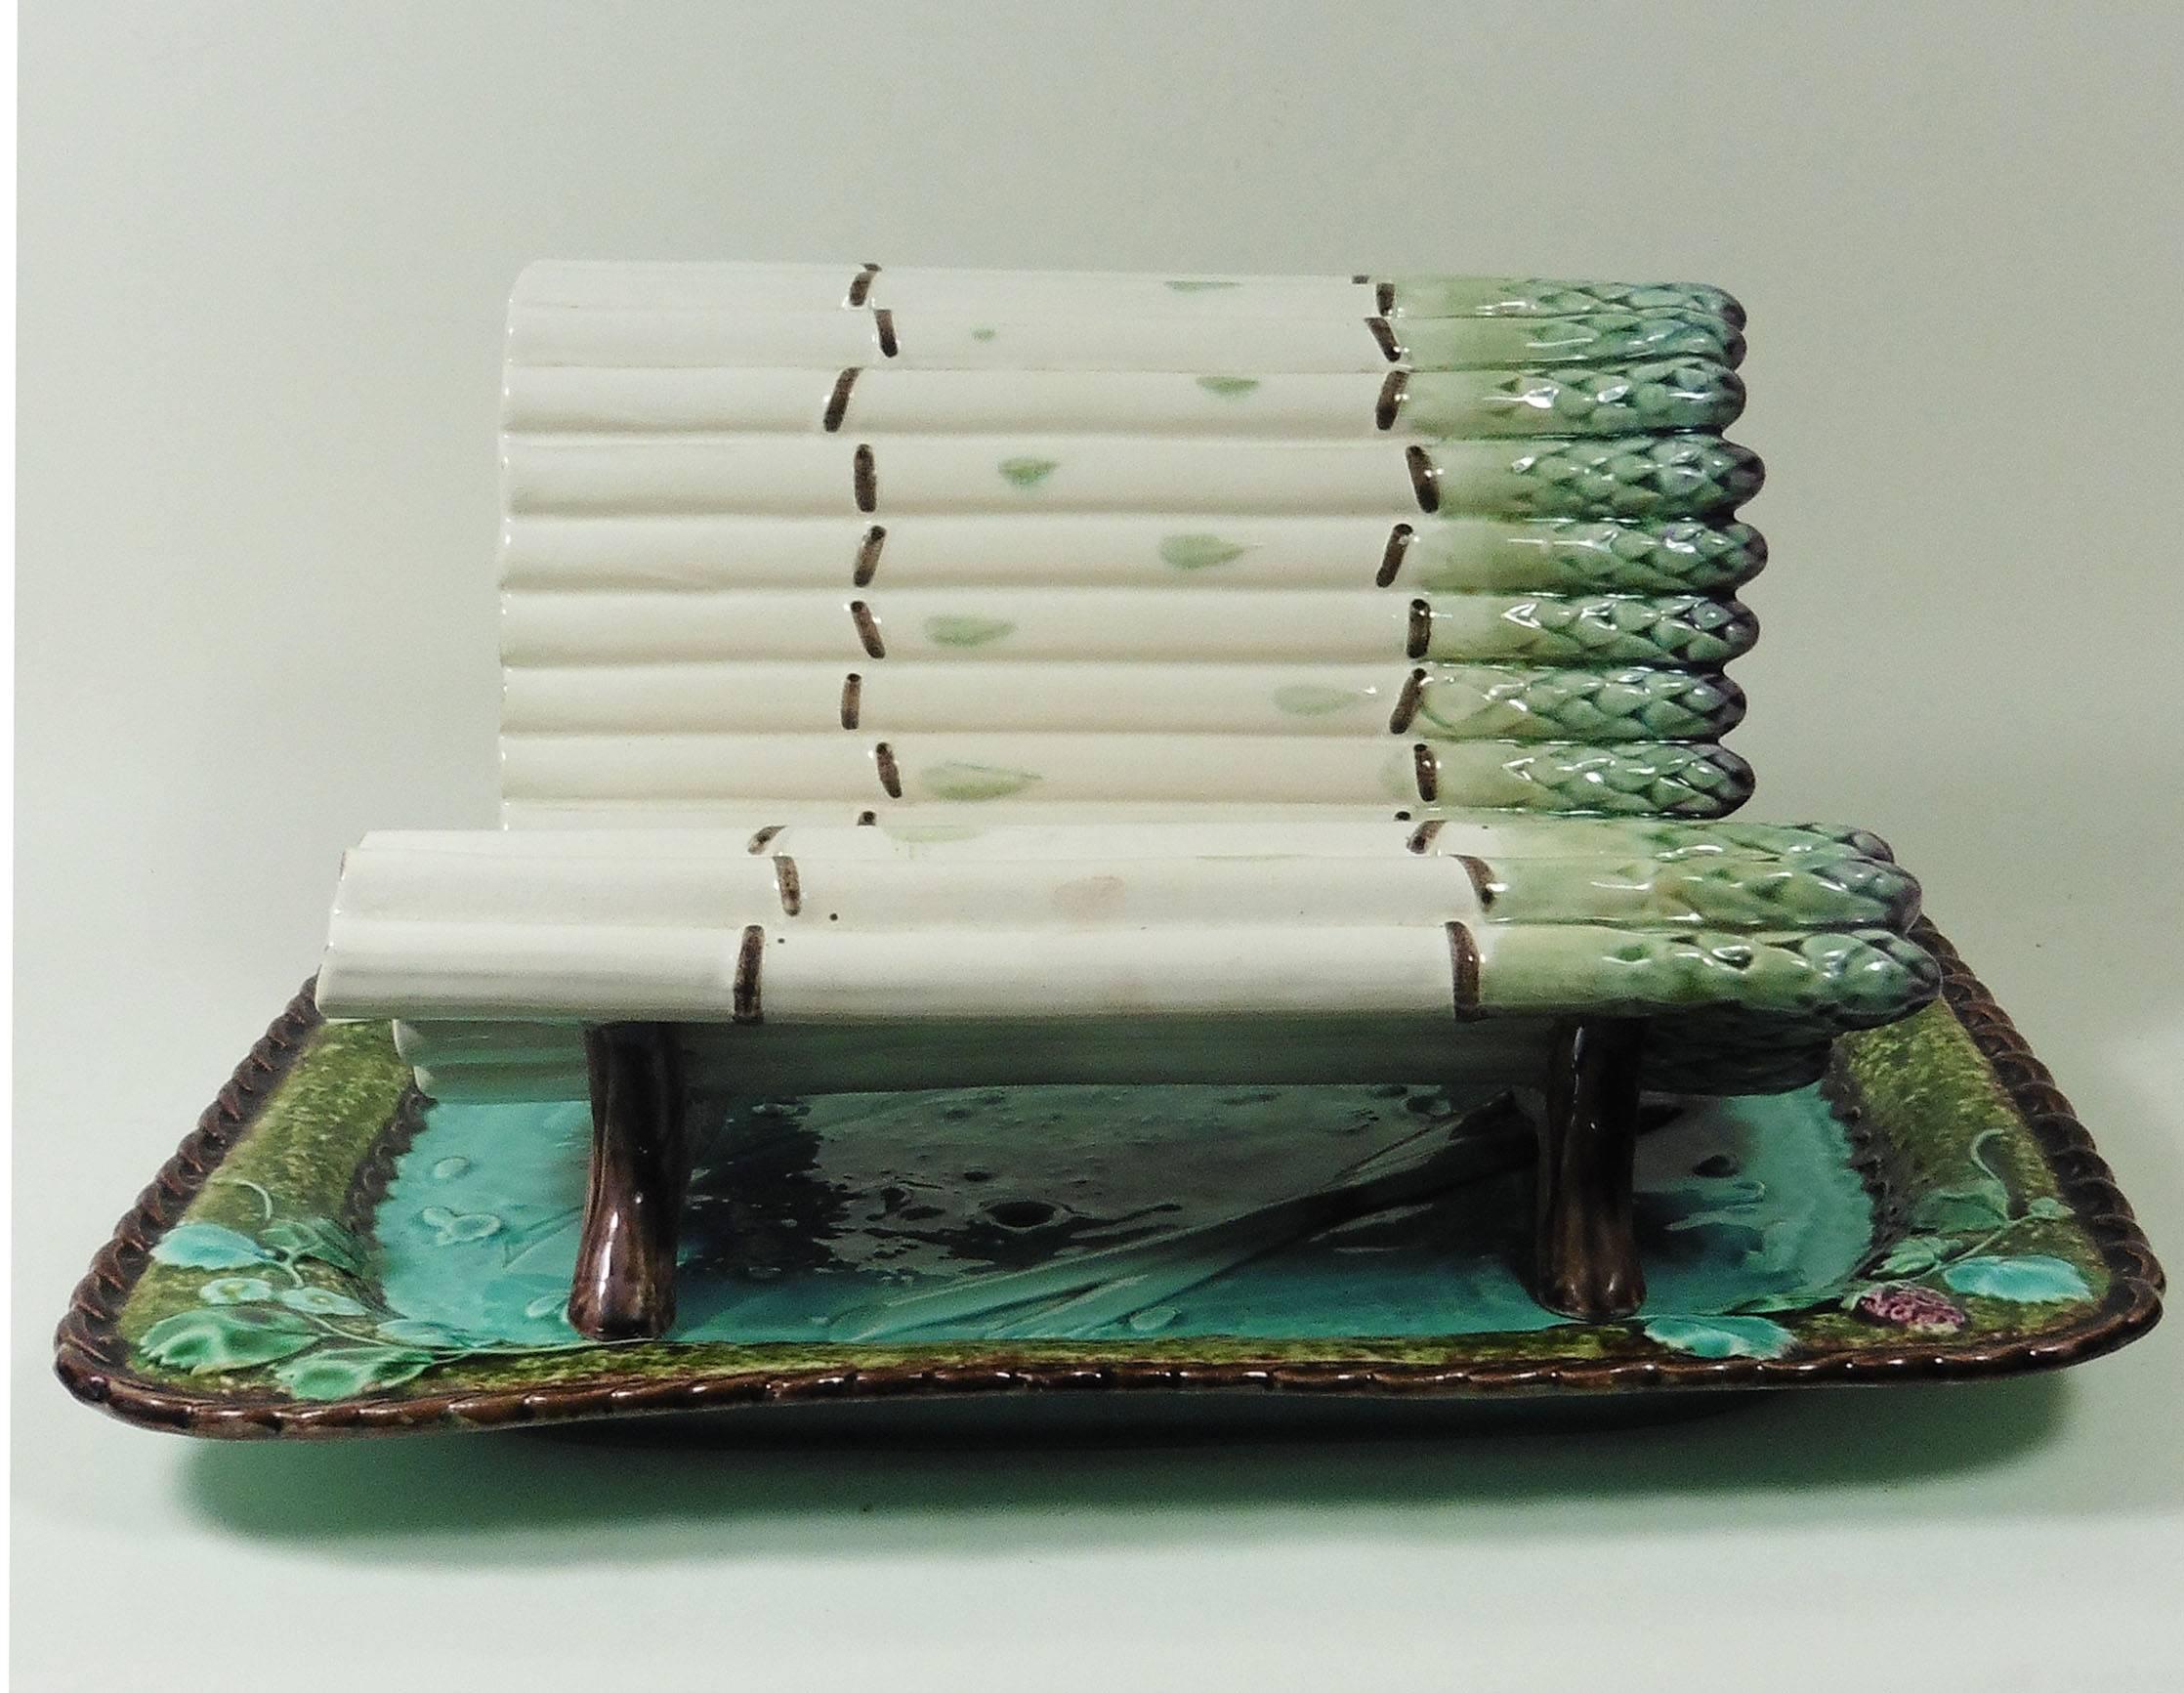 A remarkable 19th century large Majolica asparagus complete server composed with a turquoise platter decorated with asparagus and strawberries and a craddle shaped like a bench of asparagus signed Luneville.
Platter, 13